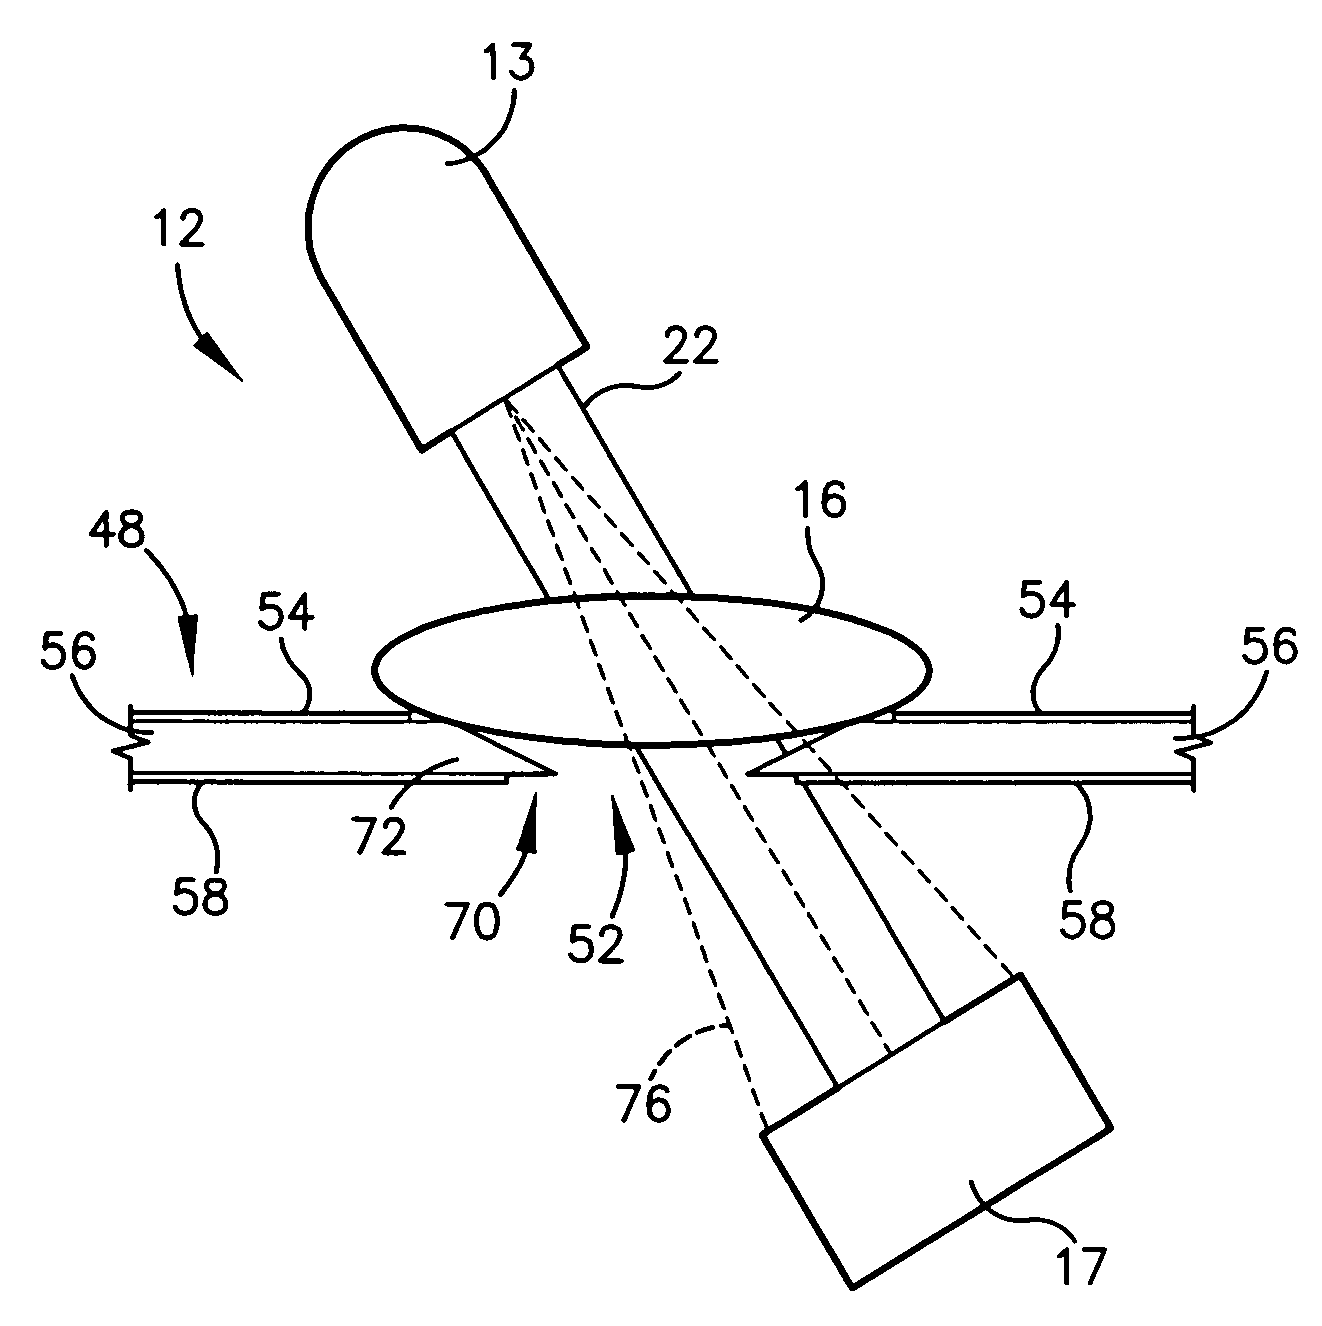 Apparatus having areas of reduced attenuation for imaging support